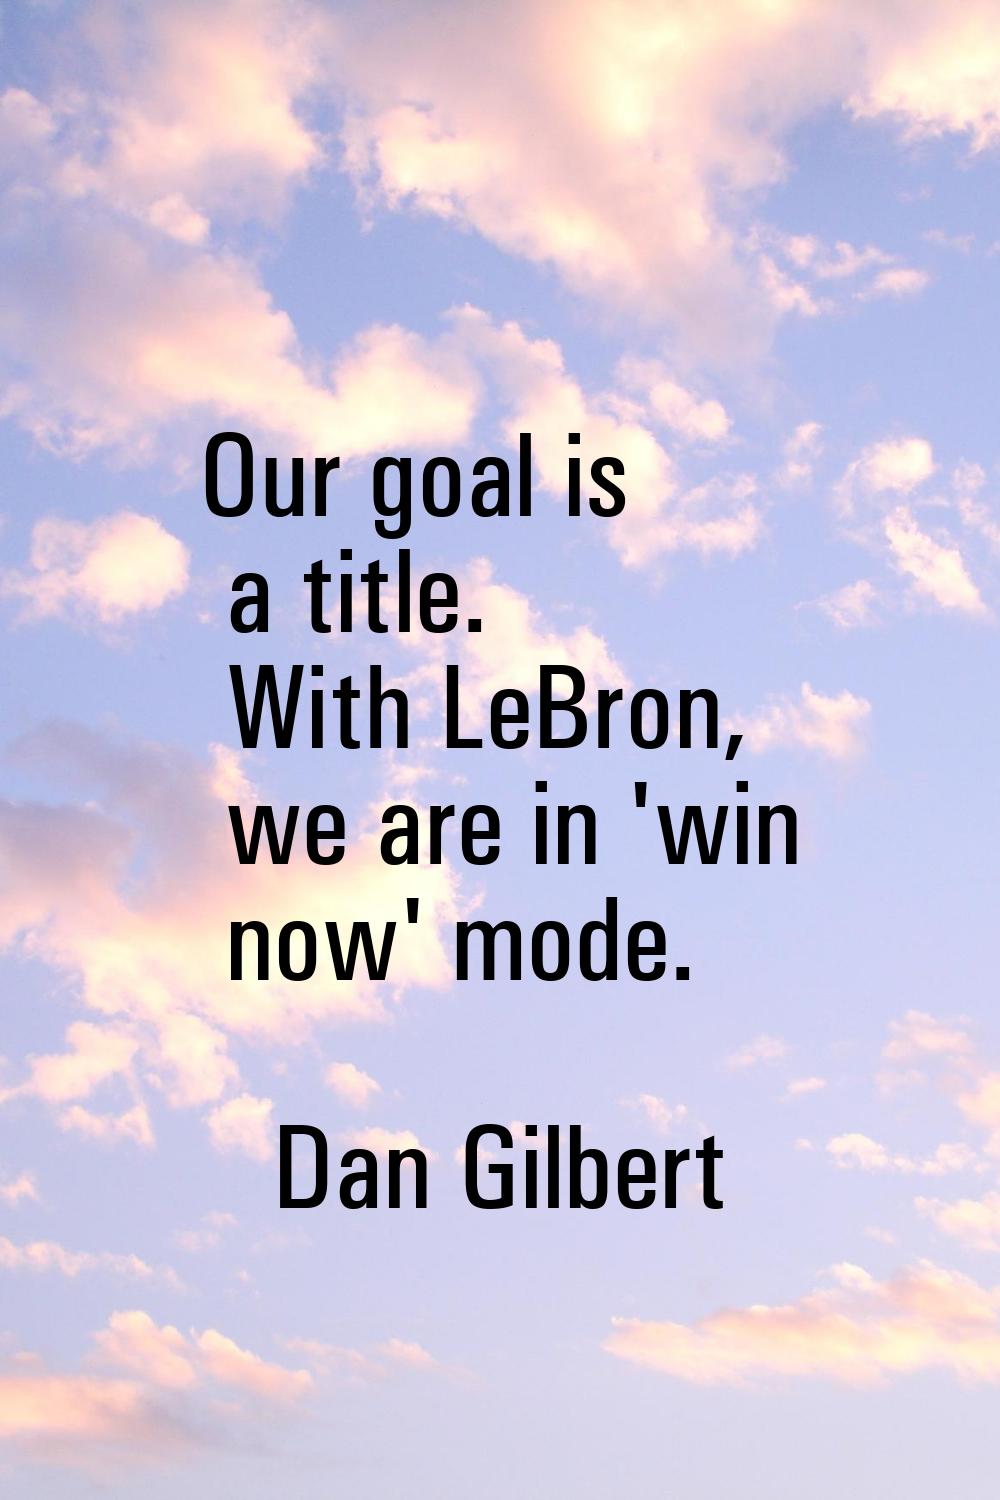 Our goal is a title. With LeBron, we are in 'win now' mode.